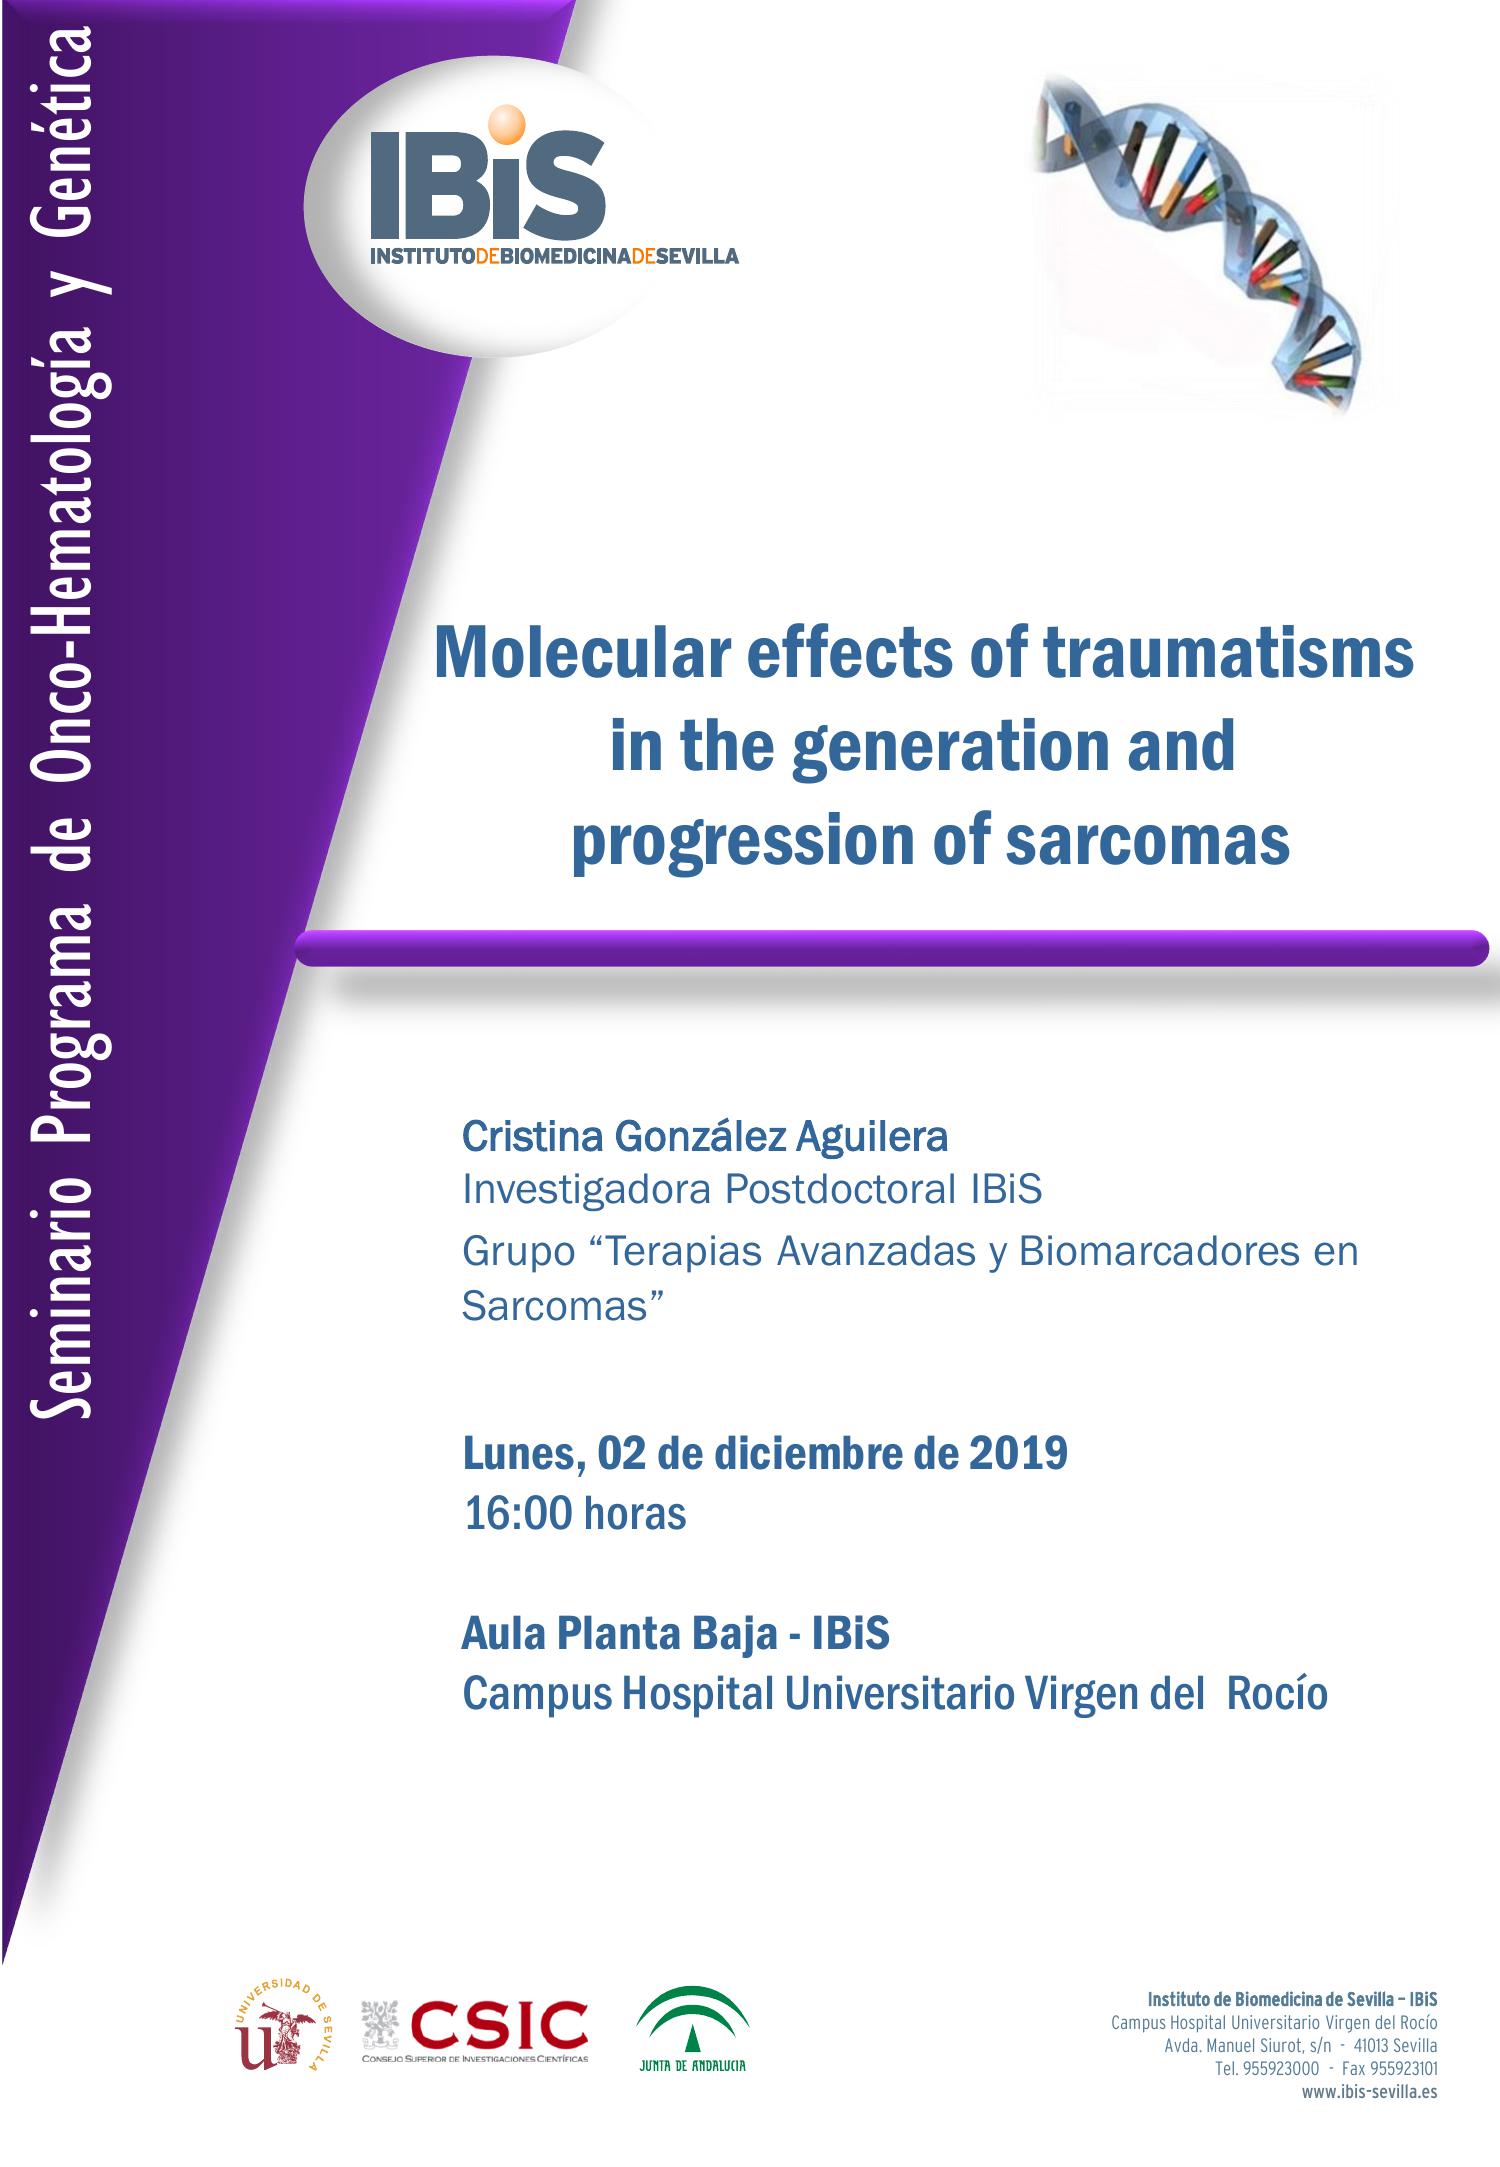 Poster: Molecular effects of traumatisms in the generation and progression of sarcomas